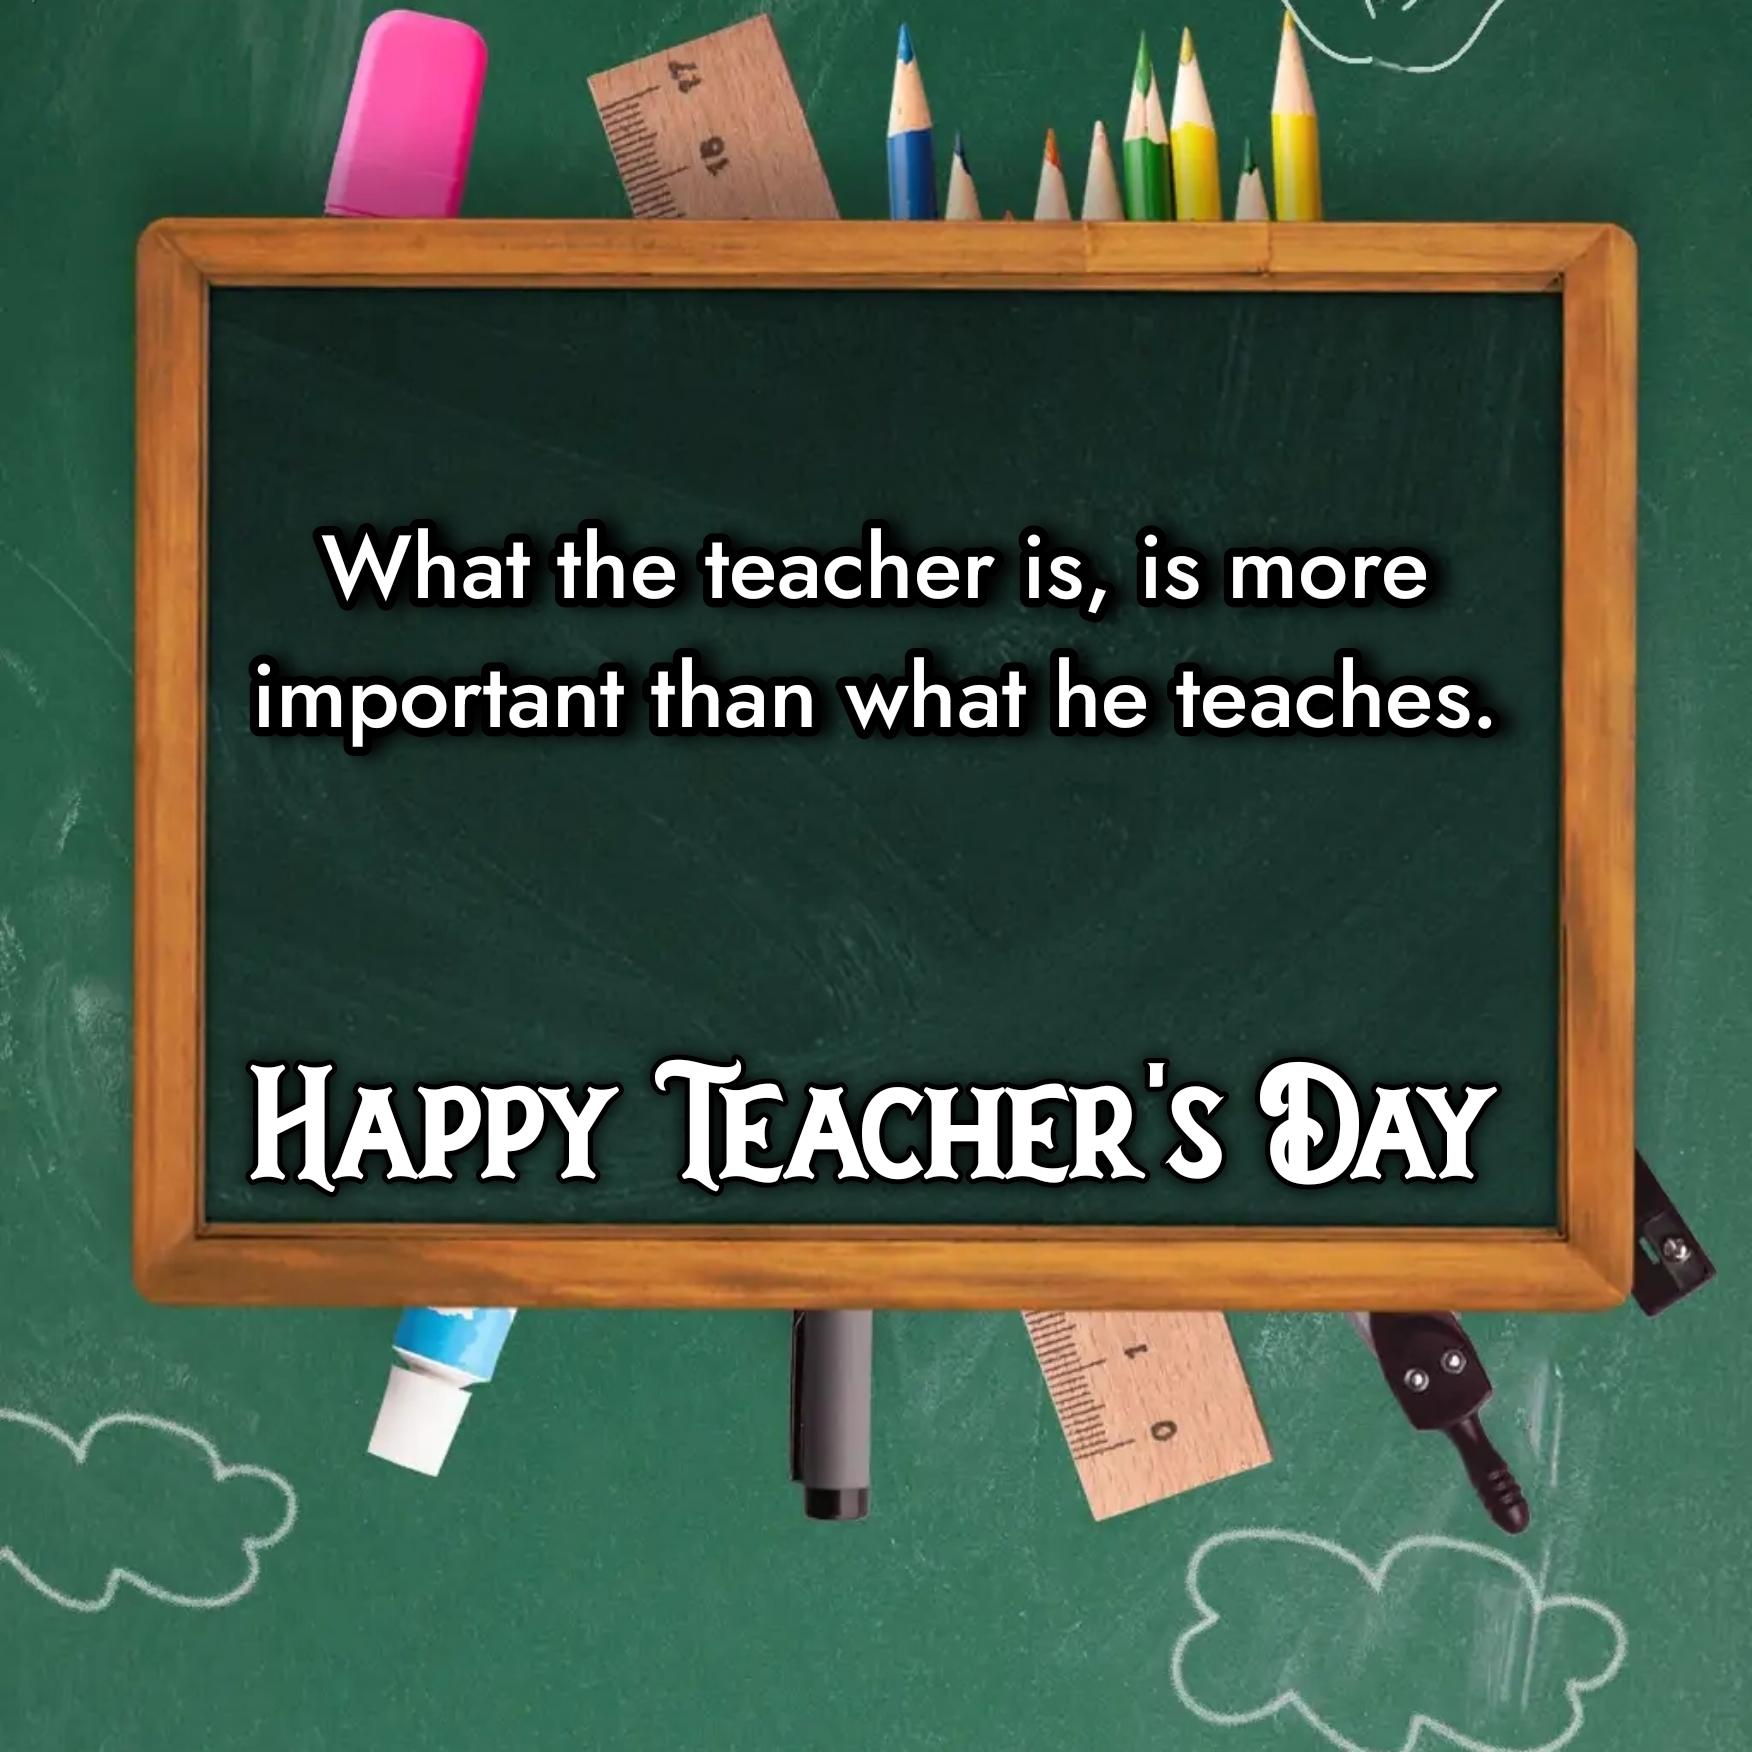 What the teacher is is more important